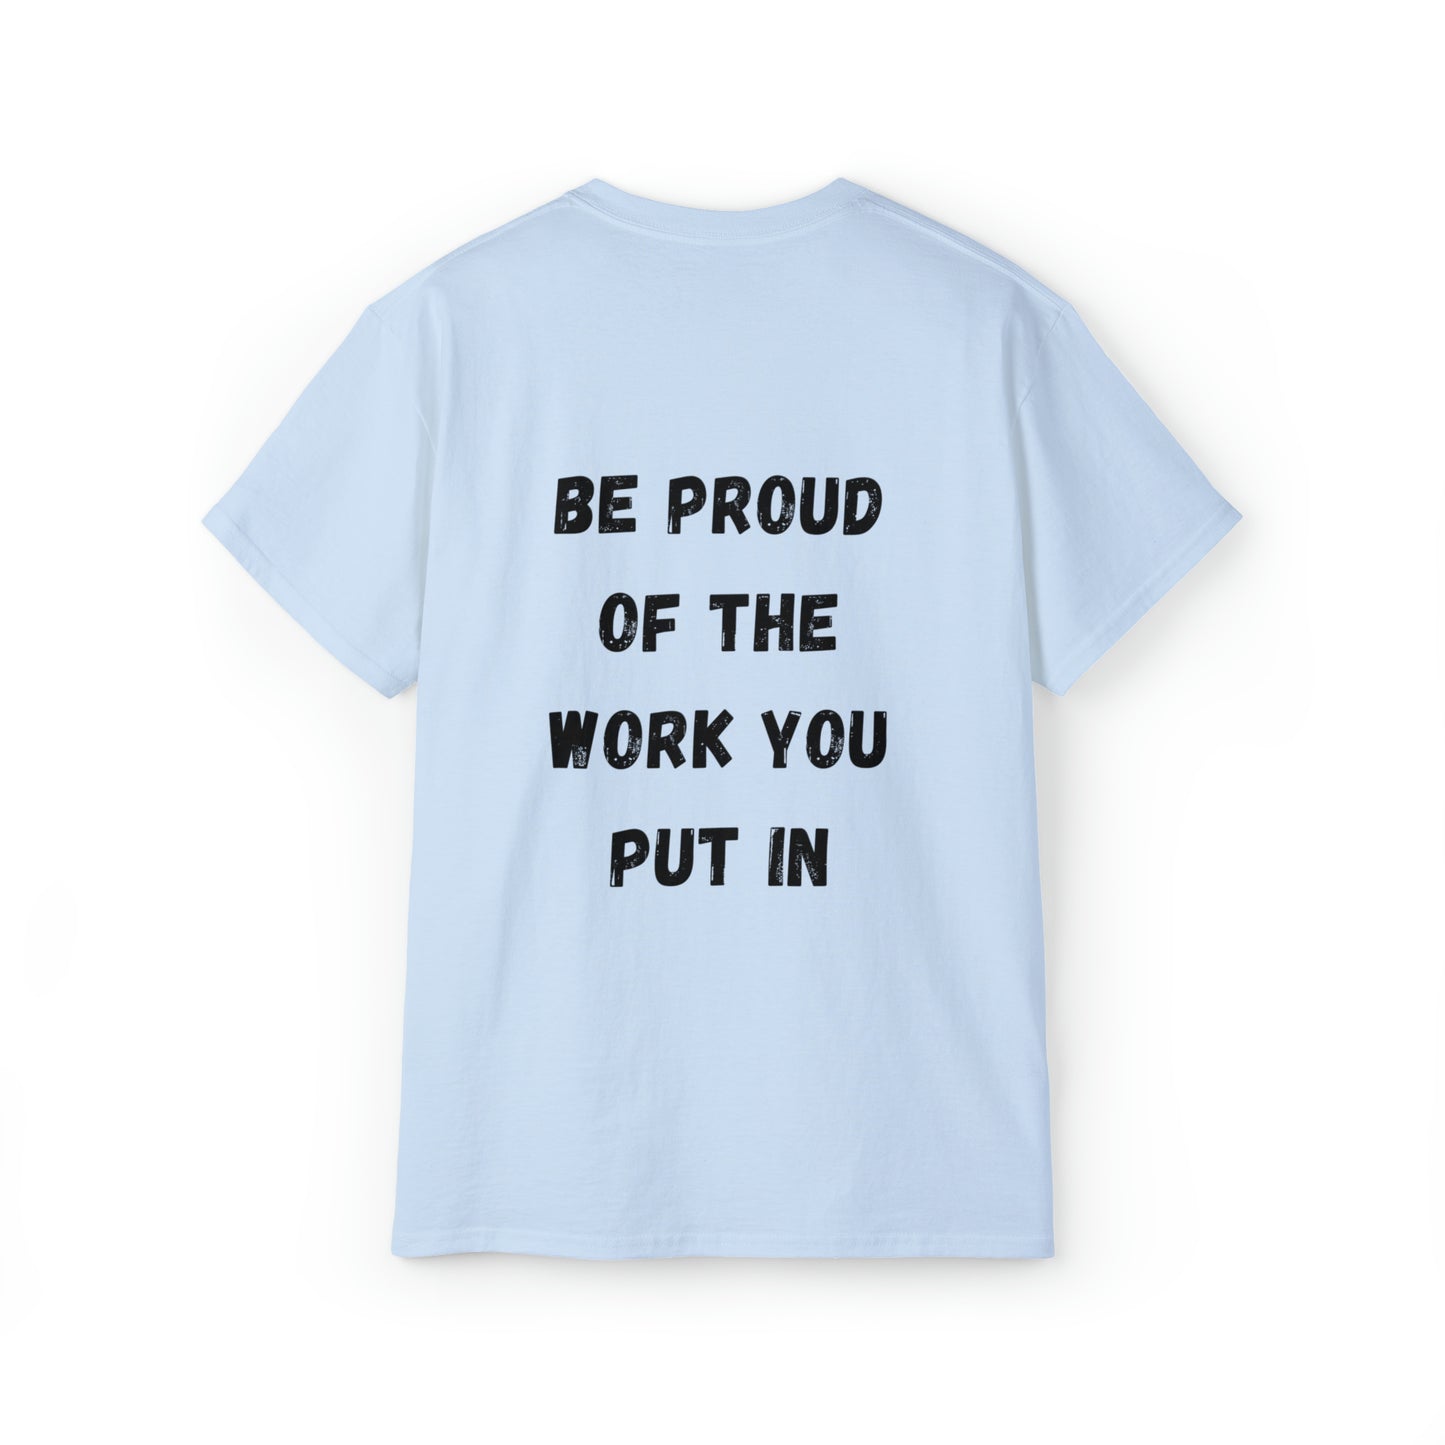 Be Proud of Your Work